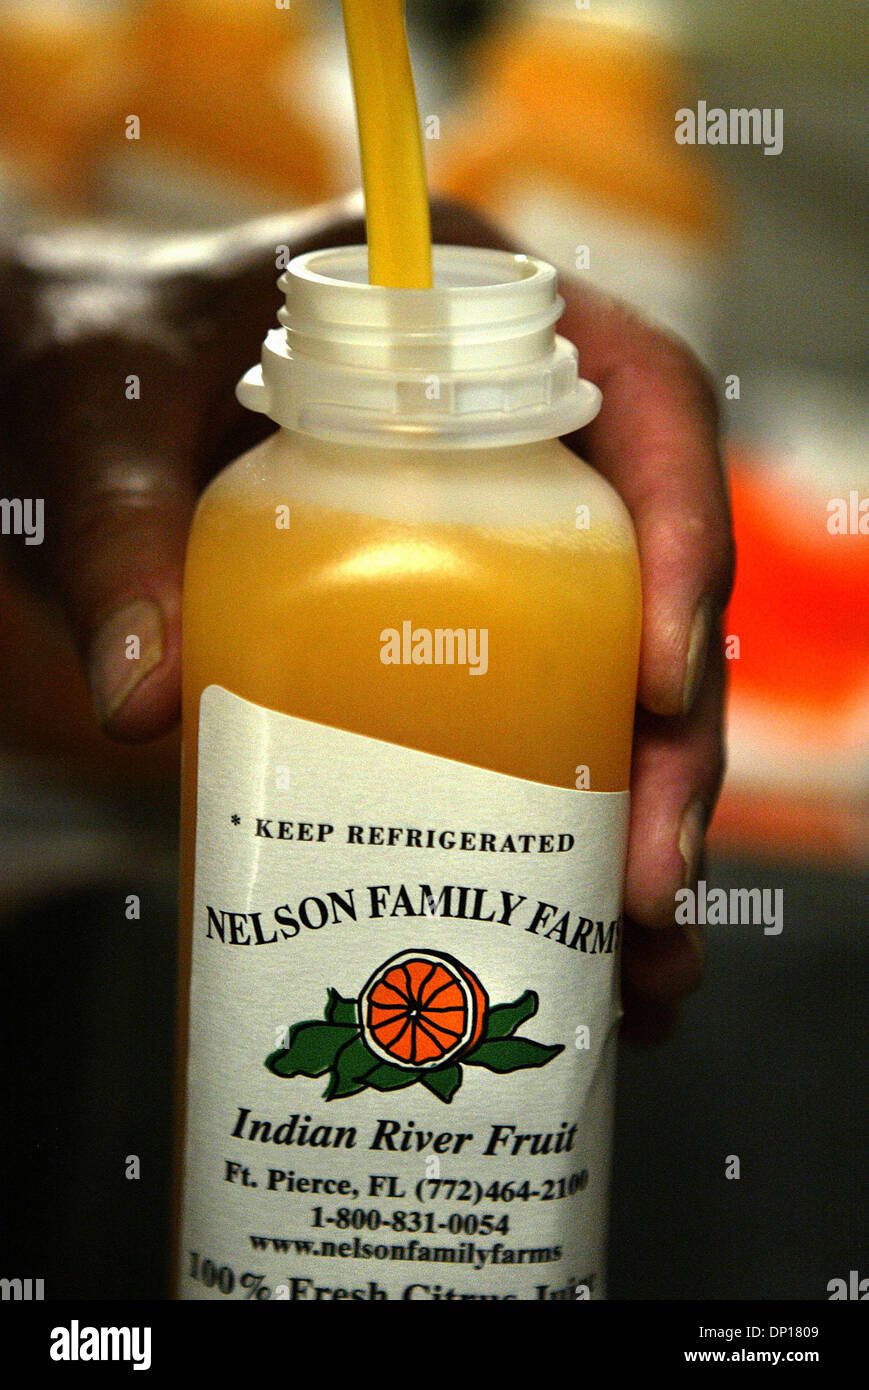 FRESH SQUEEZED ORANGE JUICE (PER CUP) | Family Farms